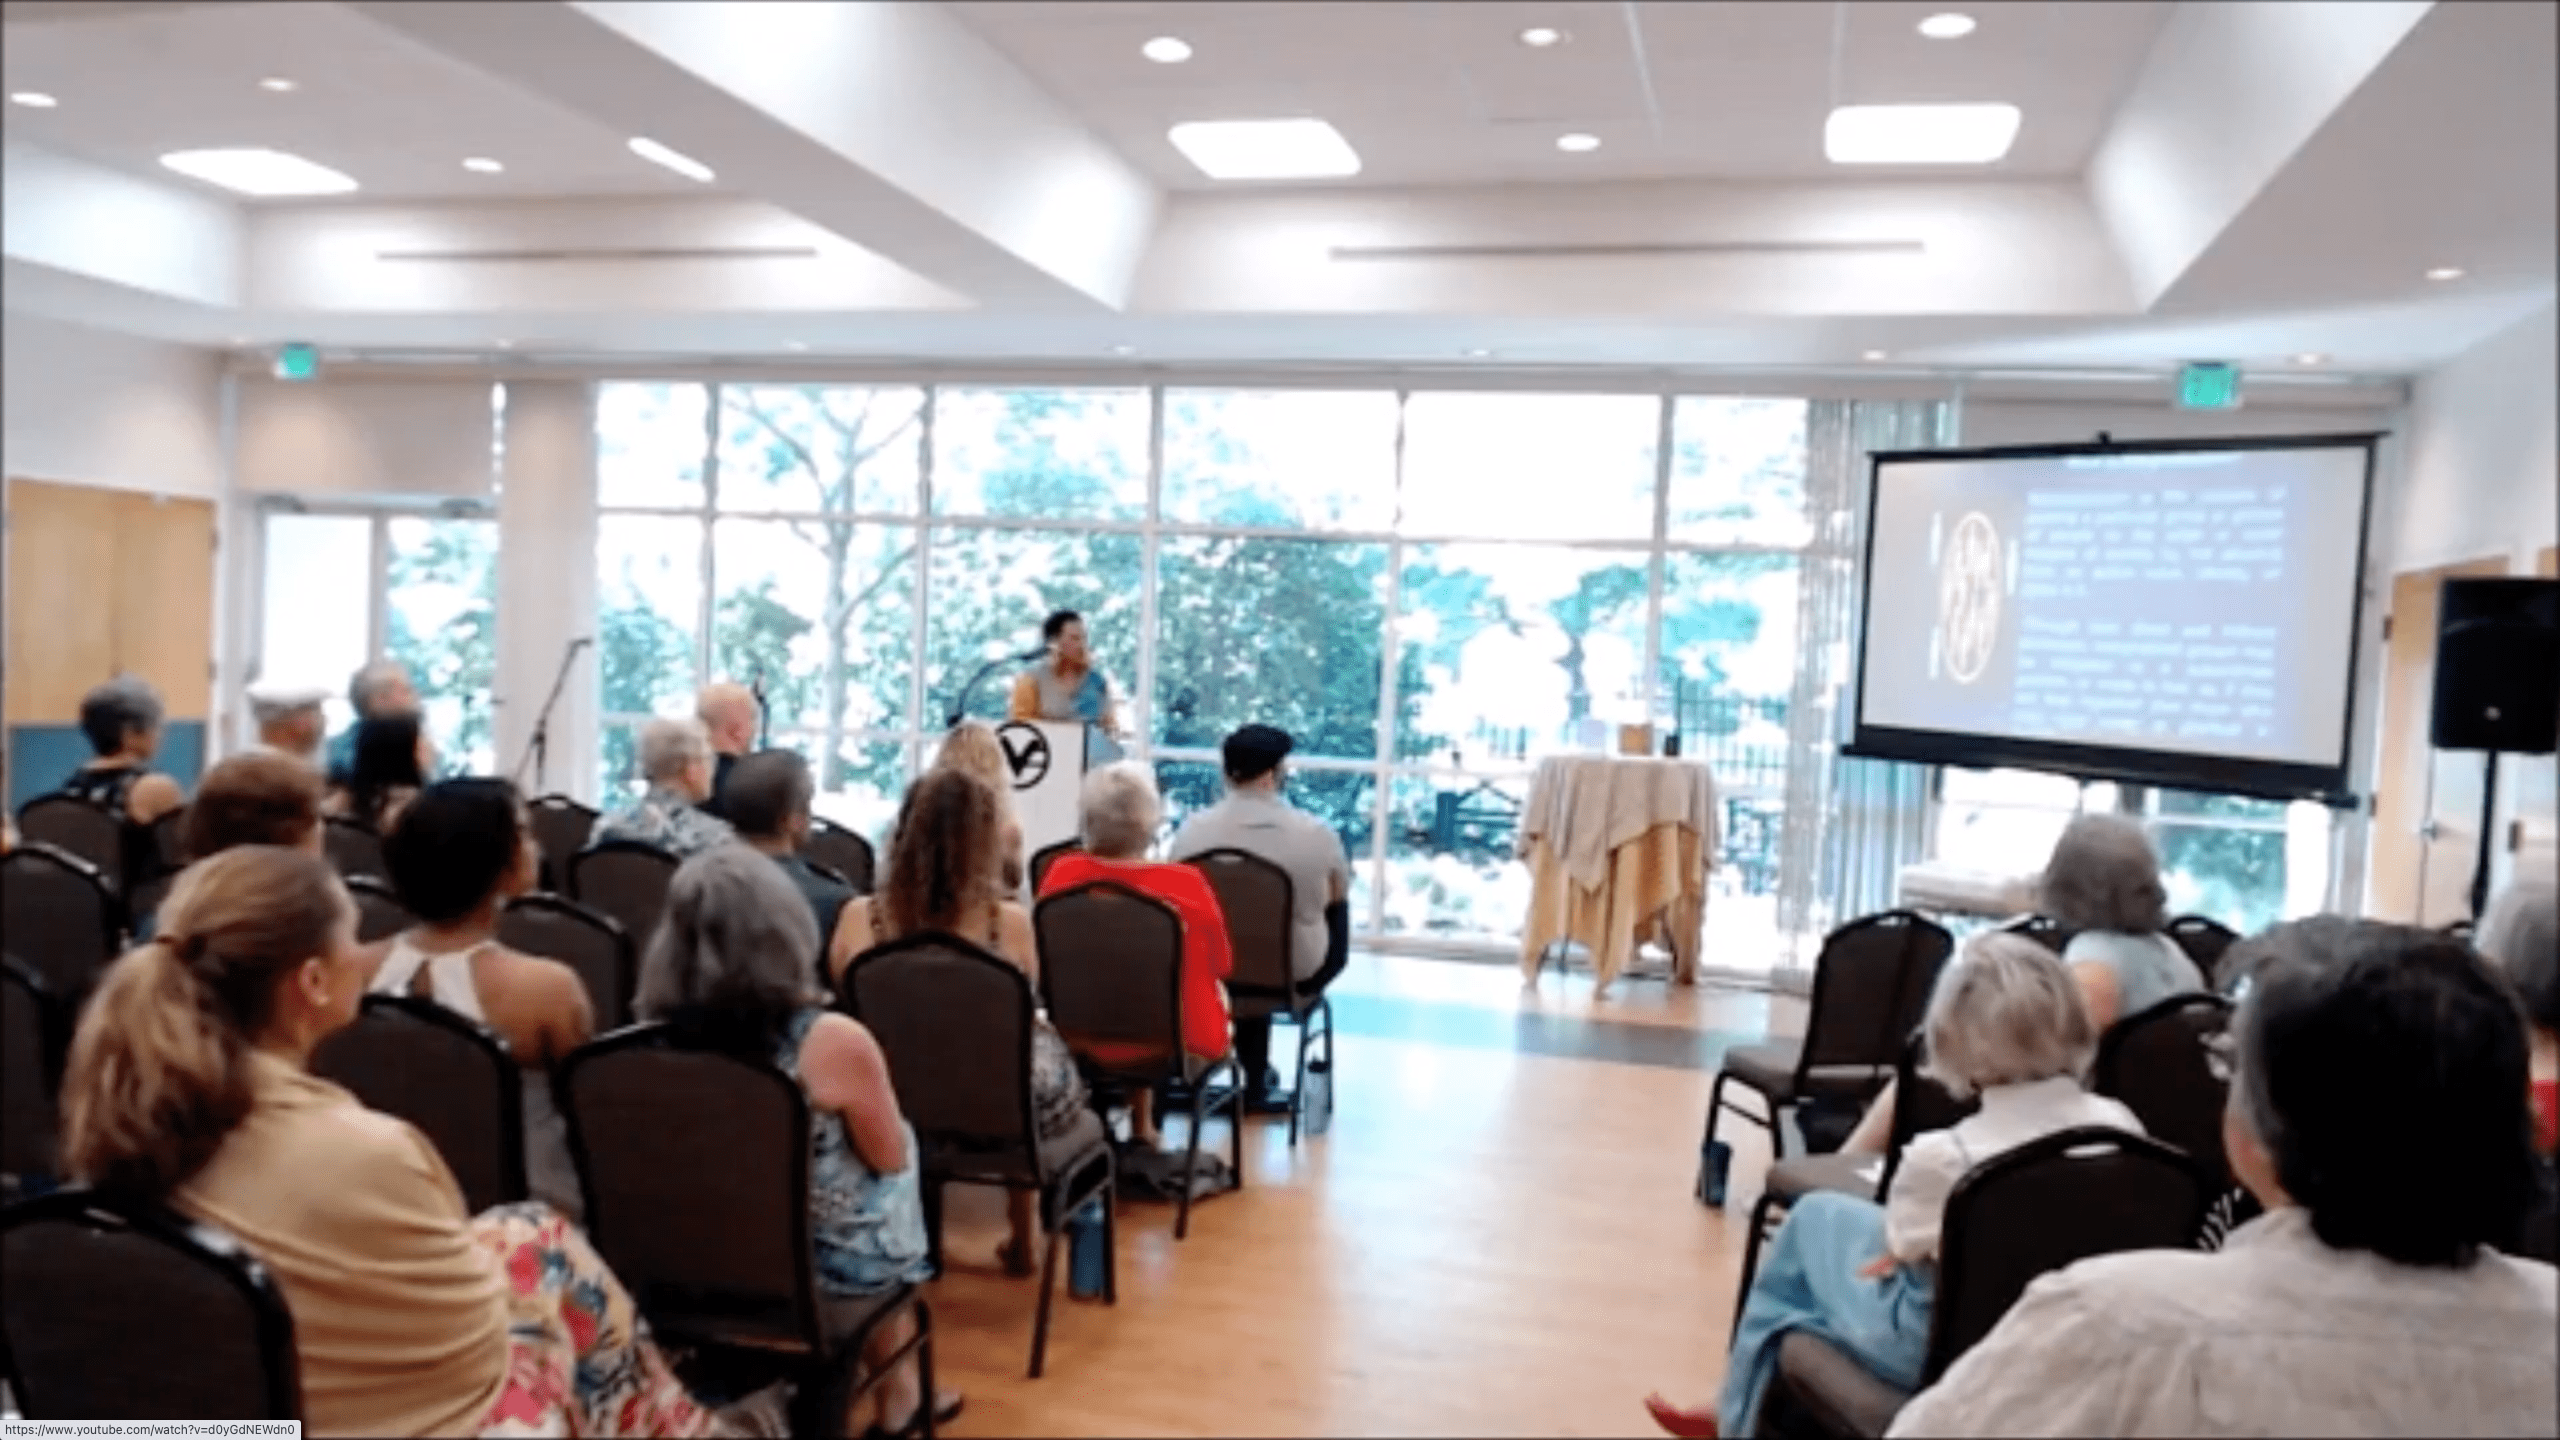 "Using SOM to Move from Marginalization to Empowerment" – Rev. Michele Synegal